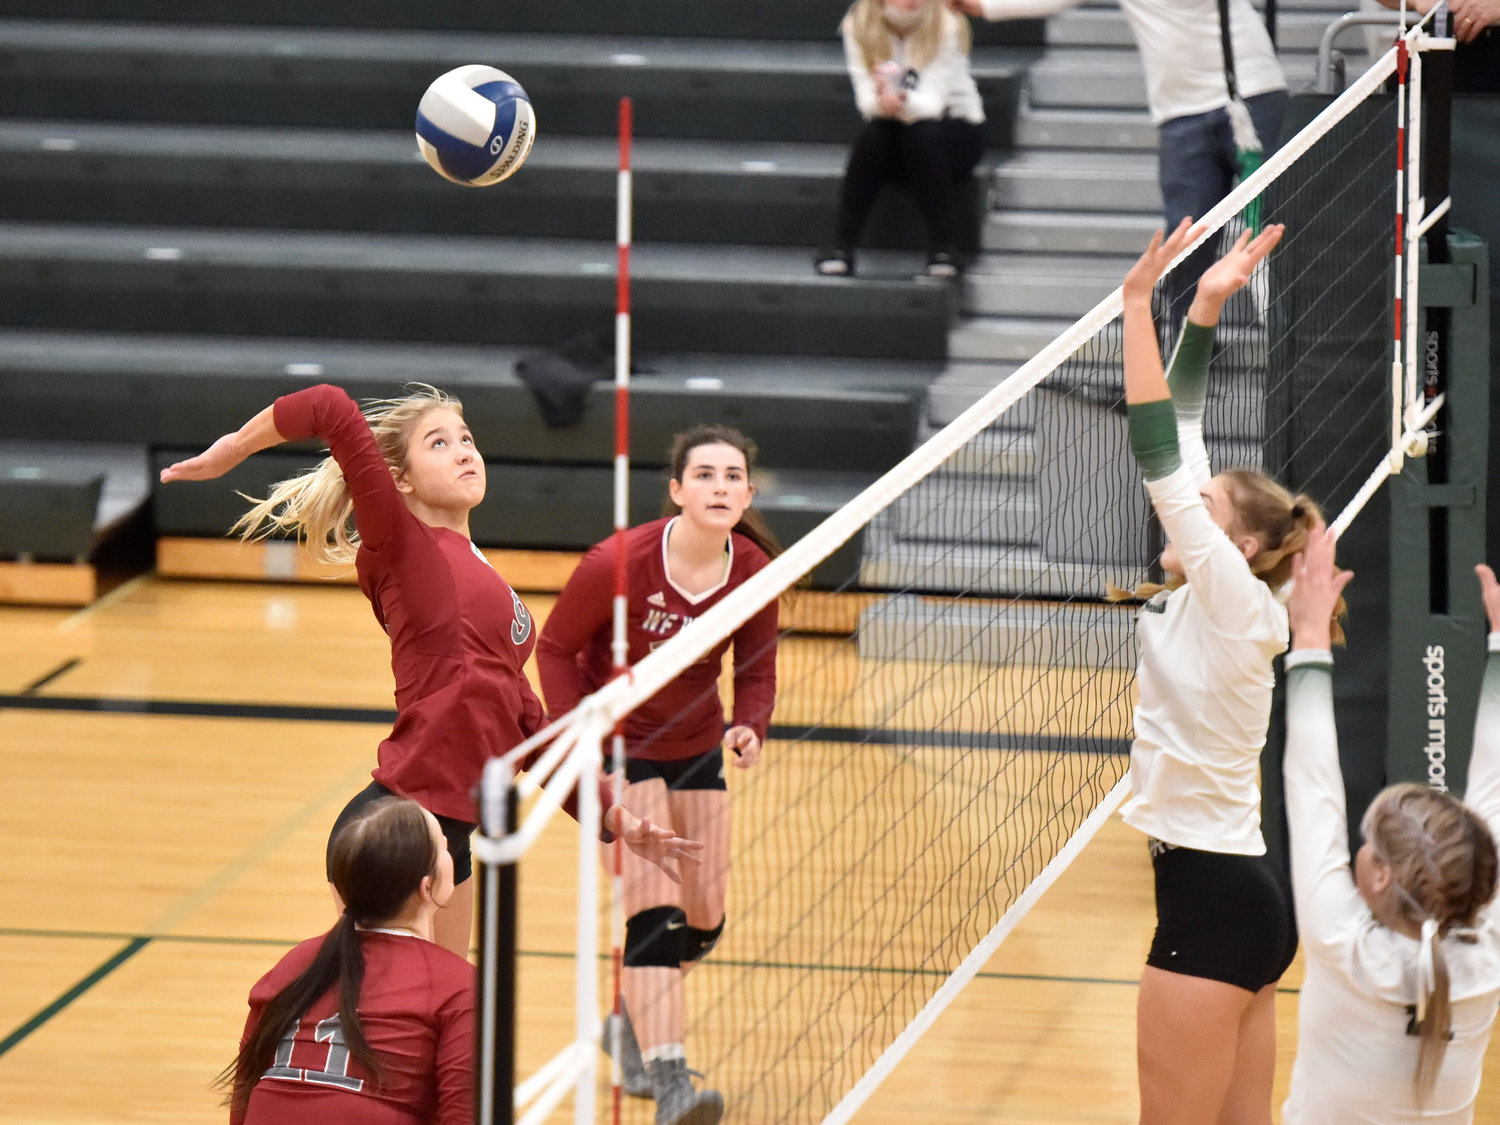 W.F. West senior Ava Olsen winds up to strike the ball against Woodland on Tuesday, Nov. 9, in Woodland.